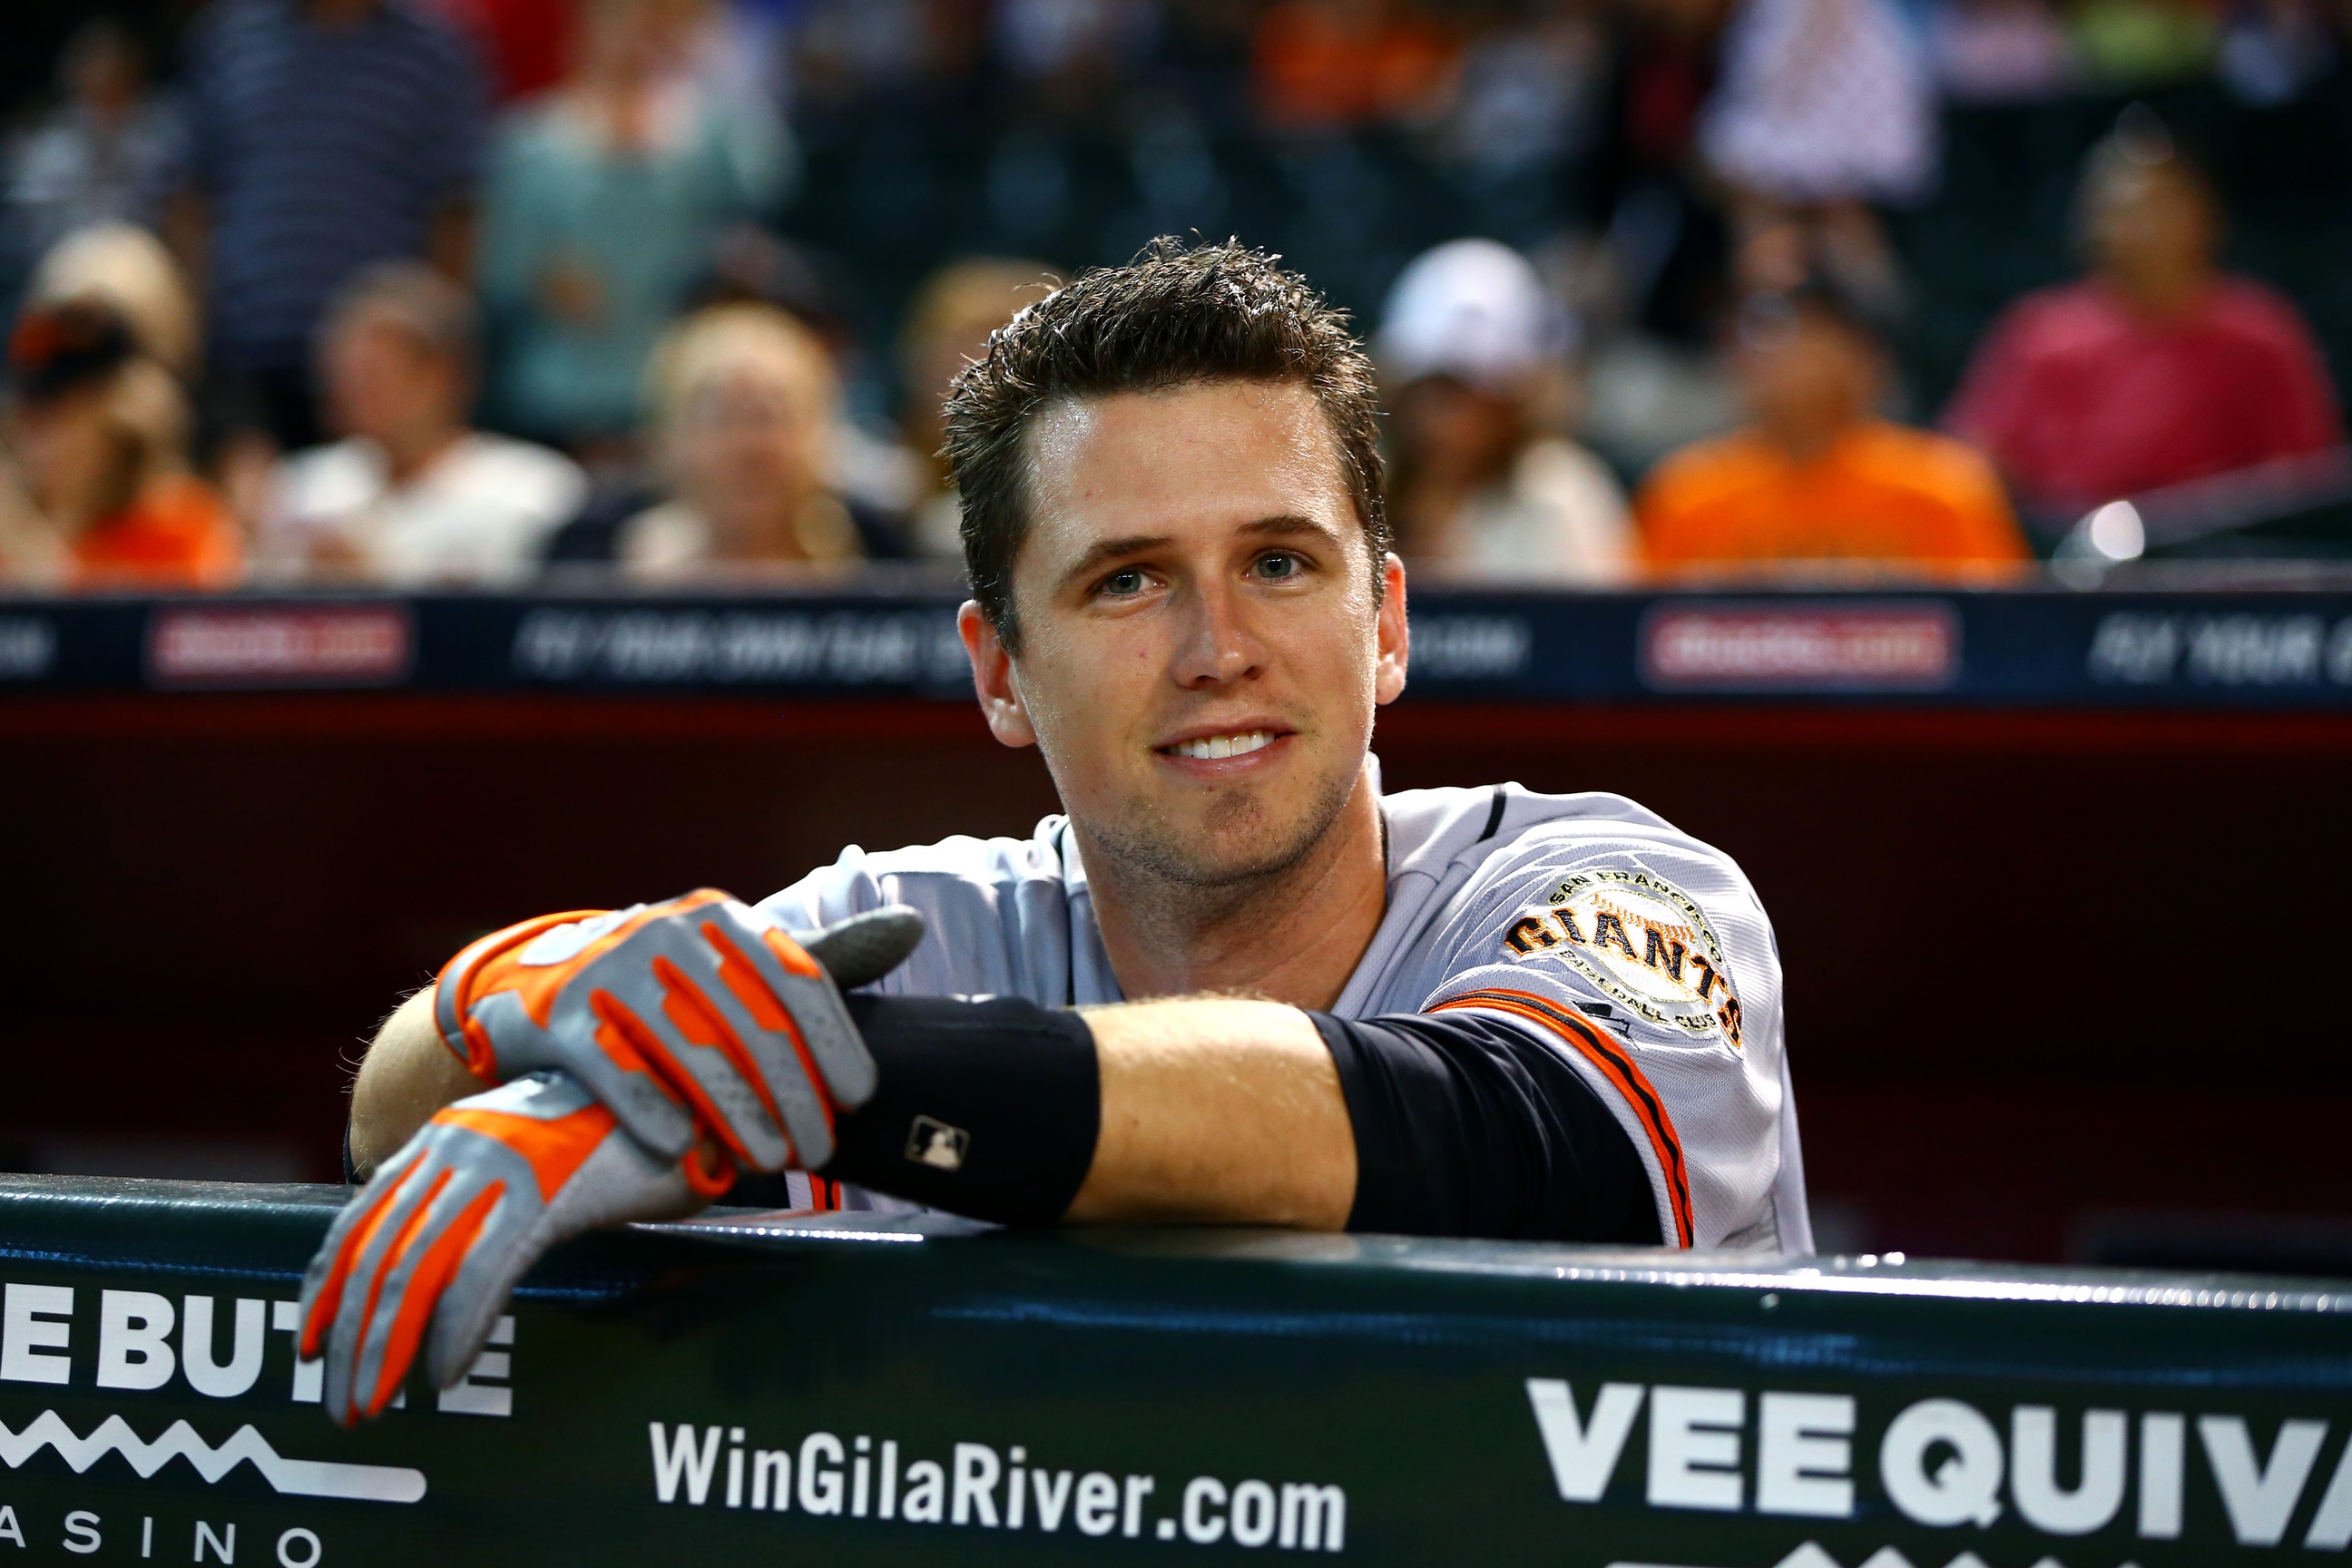 Just how good is Buster Posey?